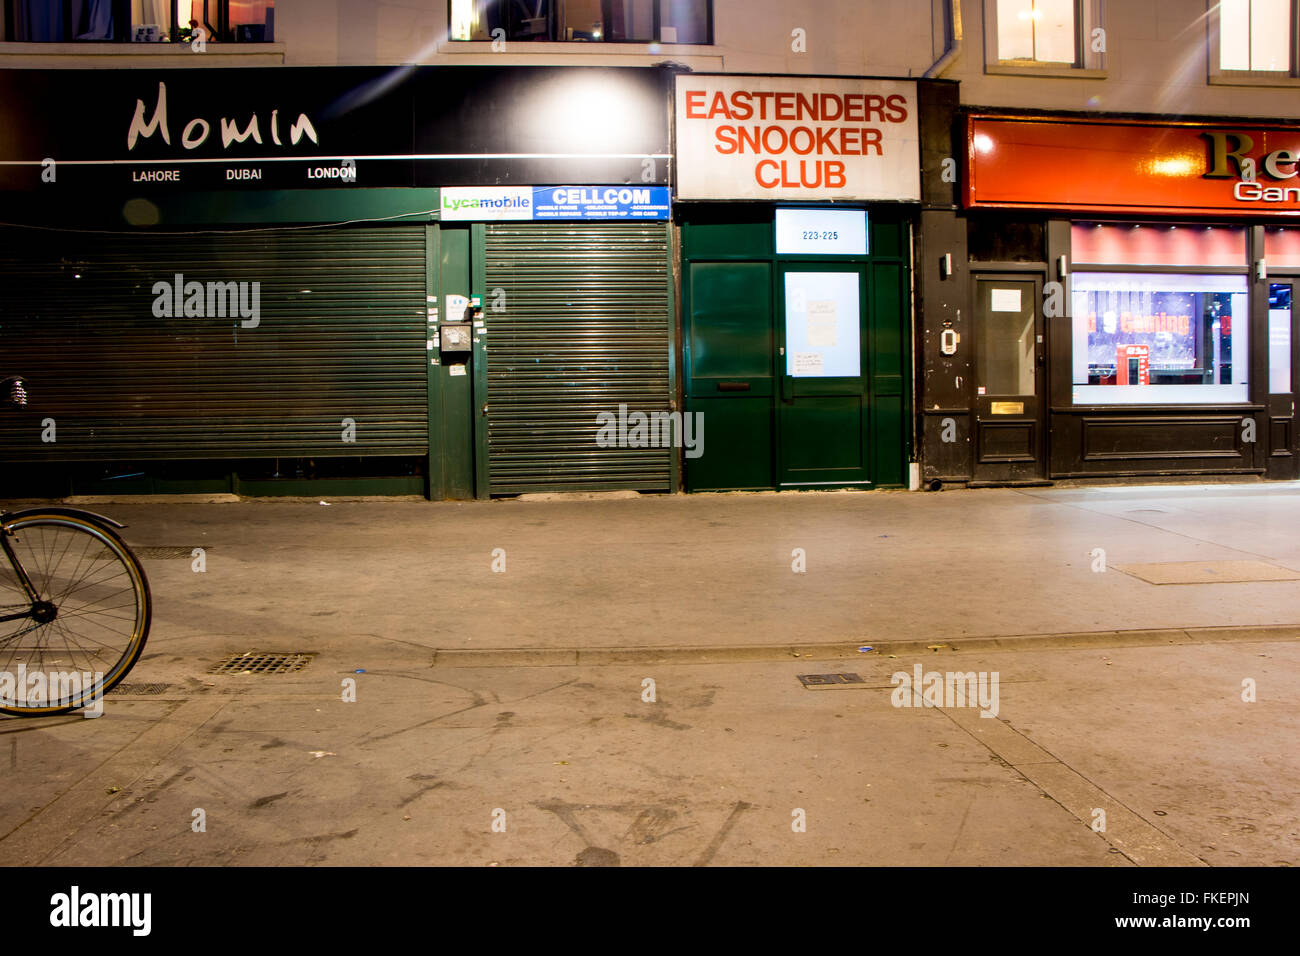 Eastenders old fashioned snooker club entrance Stock Photo